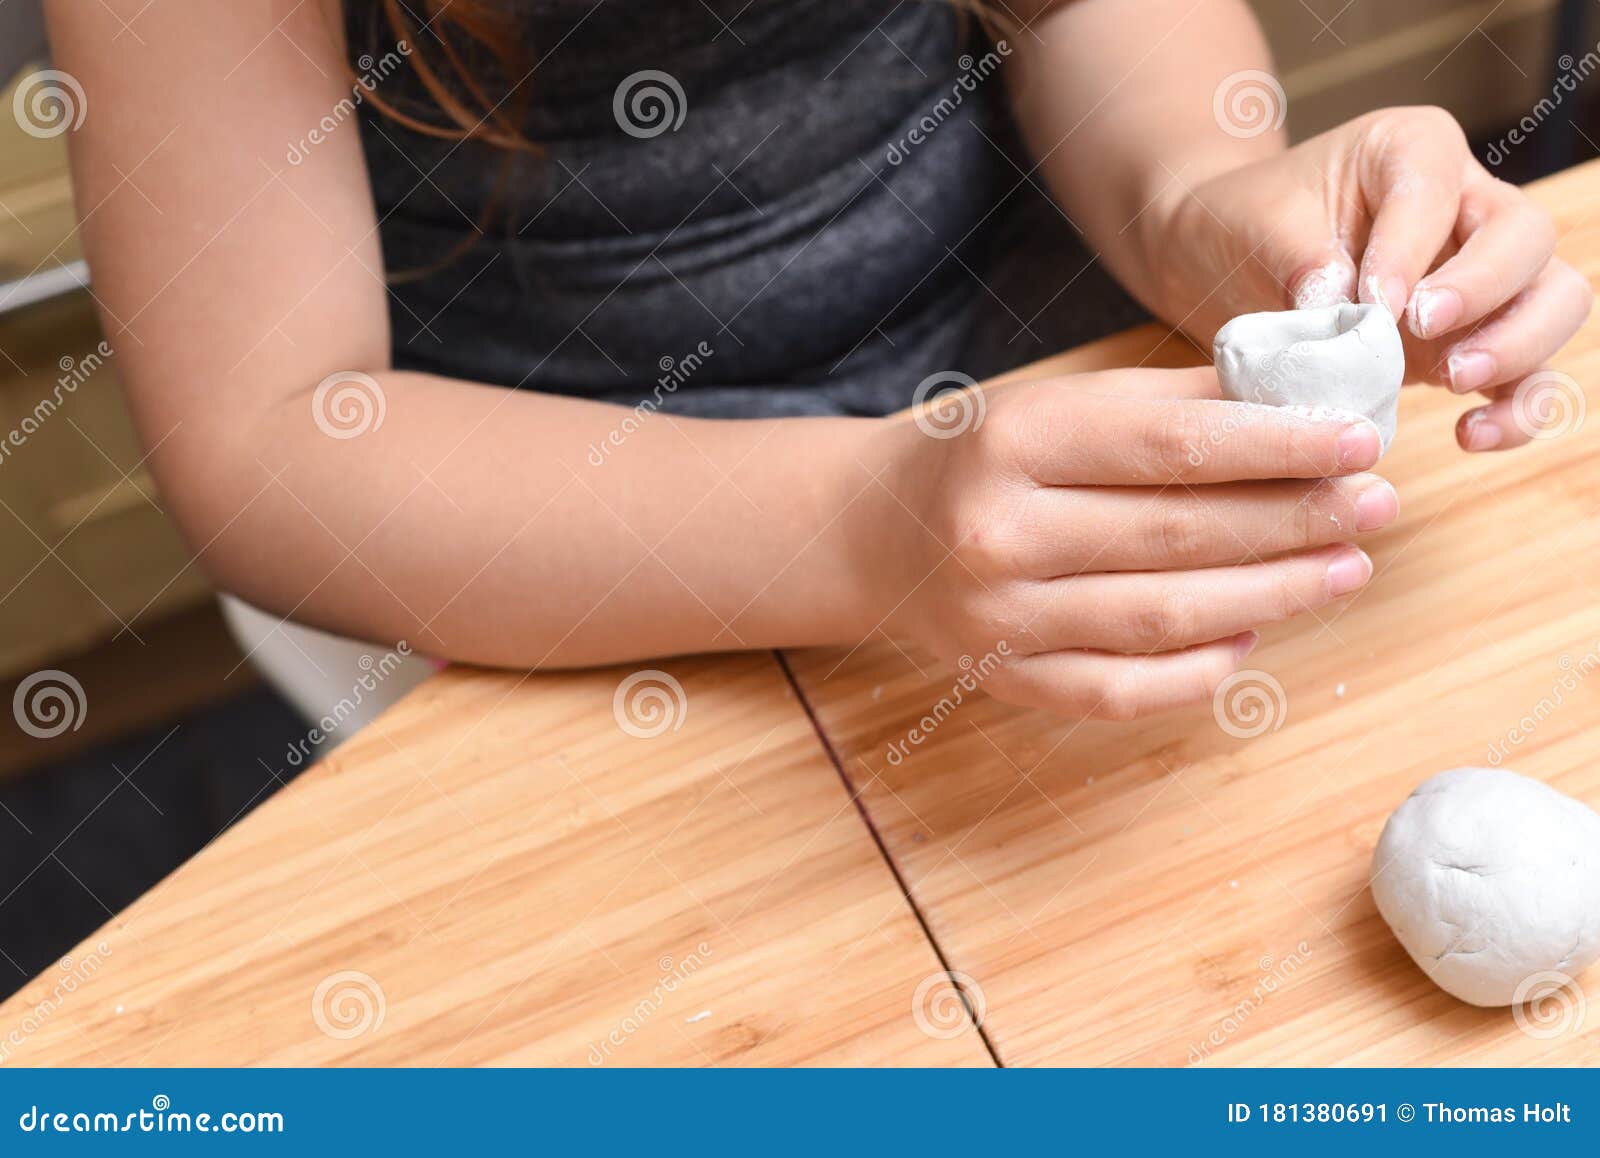 girl making pottery models with white clay at home